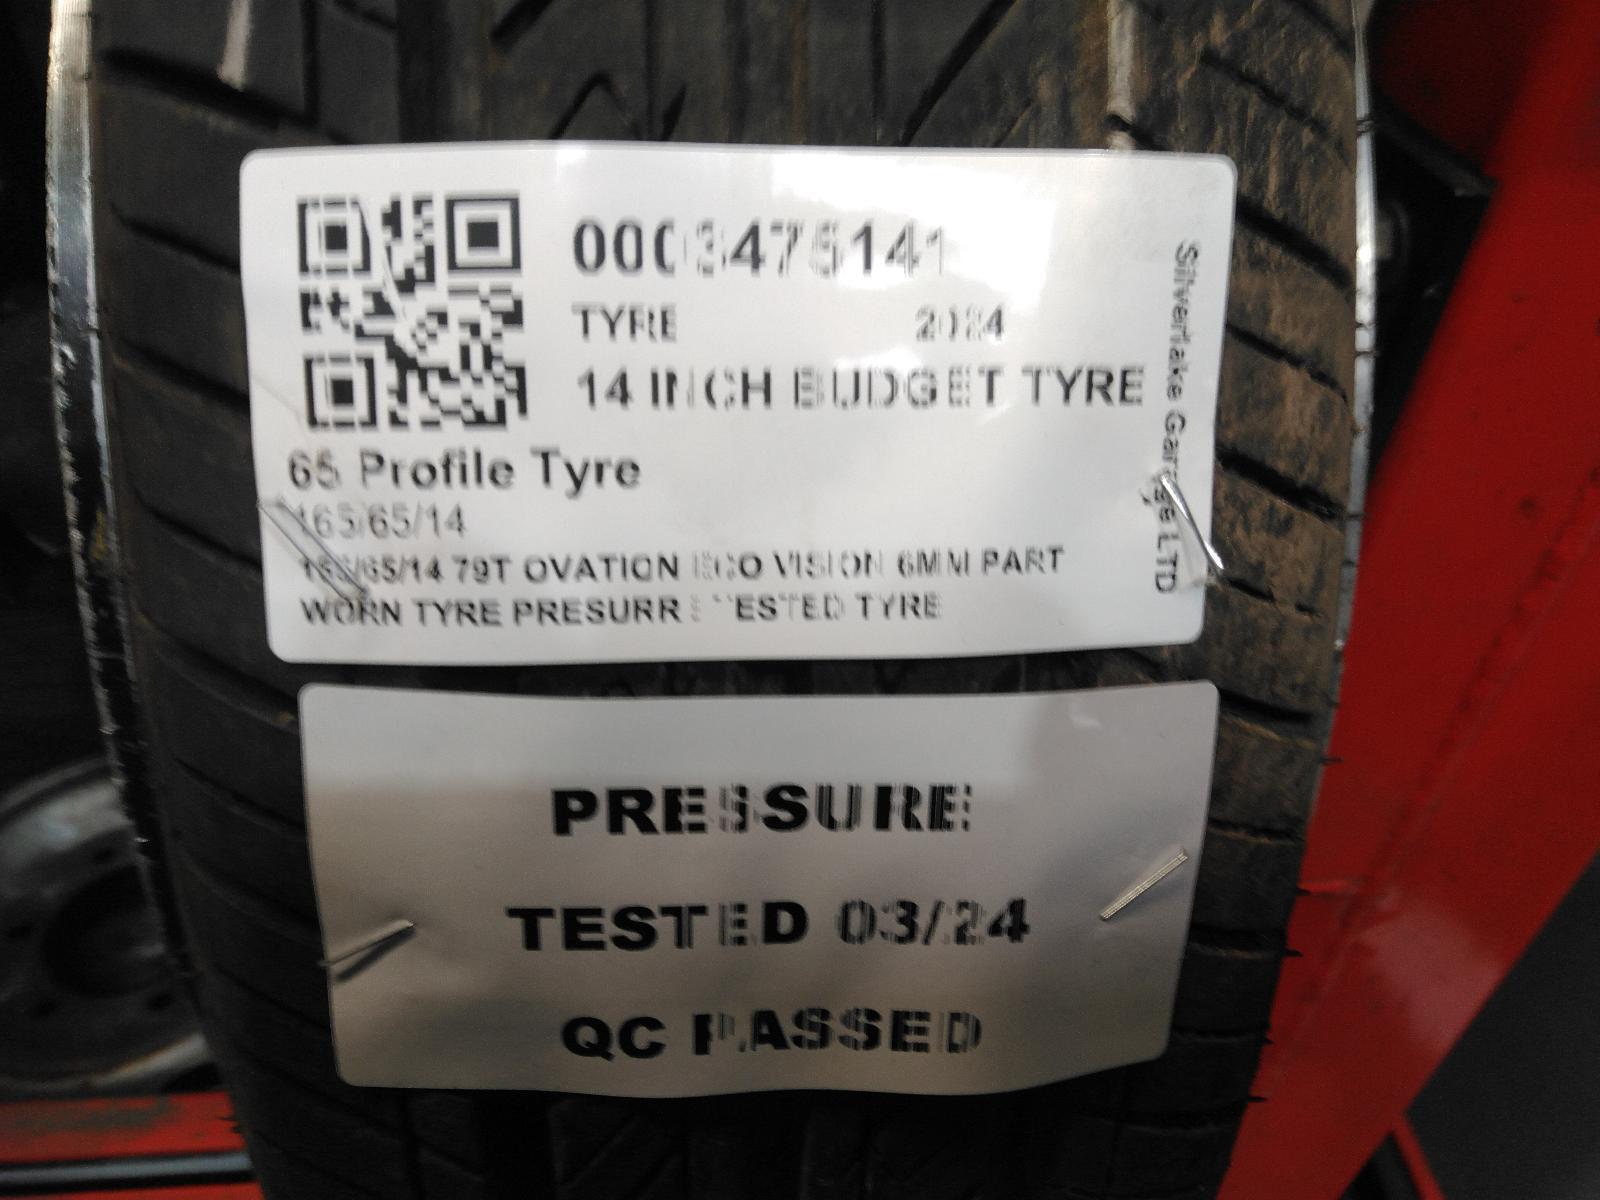 165/65/14 79T OVATION ECO VISION 6MM PART WORN TYRE PRESURRE TESTED TYRE